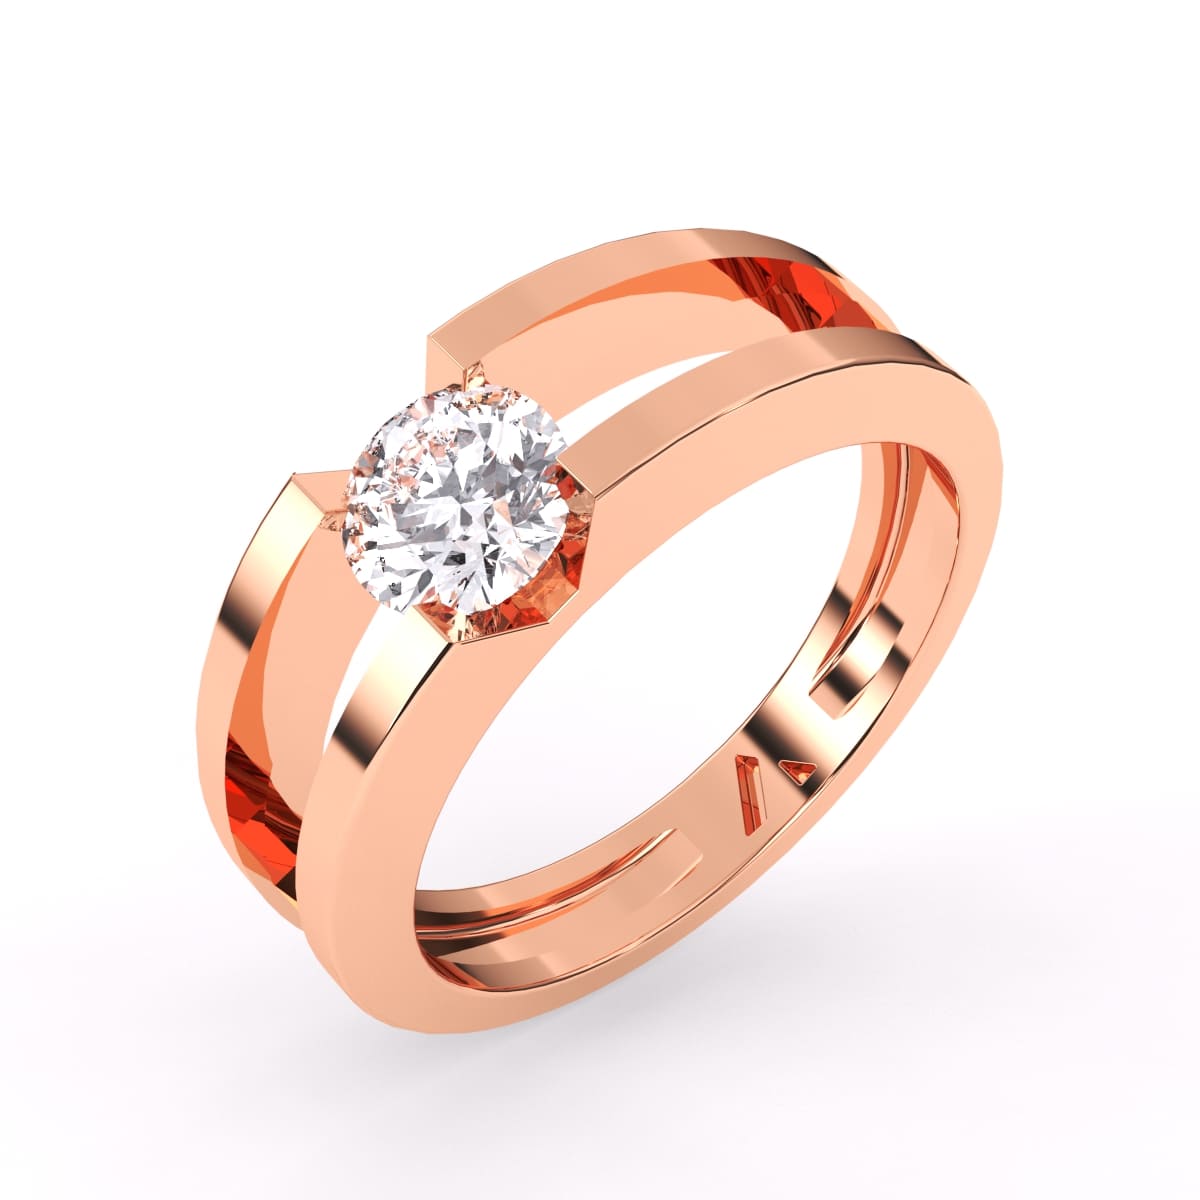 Buy Natural Champagne Diamond Men's Ring in Vermeil Rose Gold Over Sterling  Silver (Size 13.0) 1.00 ctw at ShopLC.